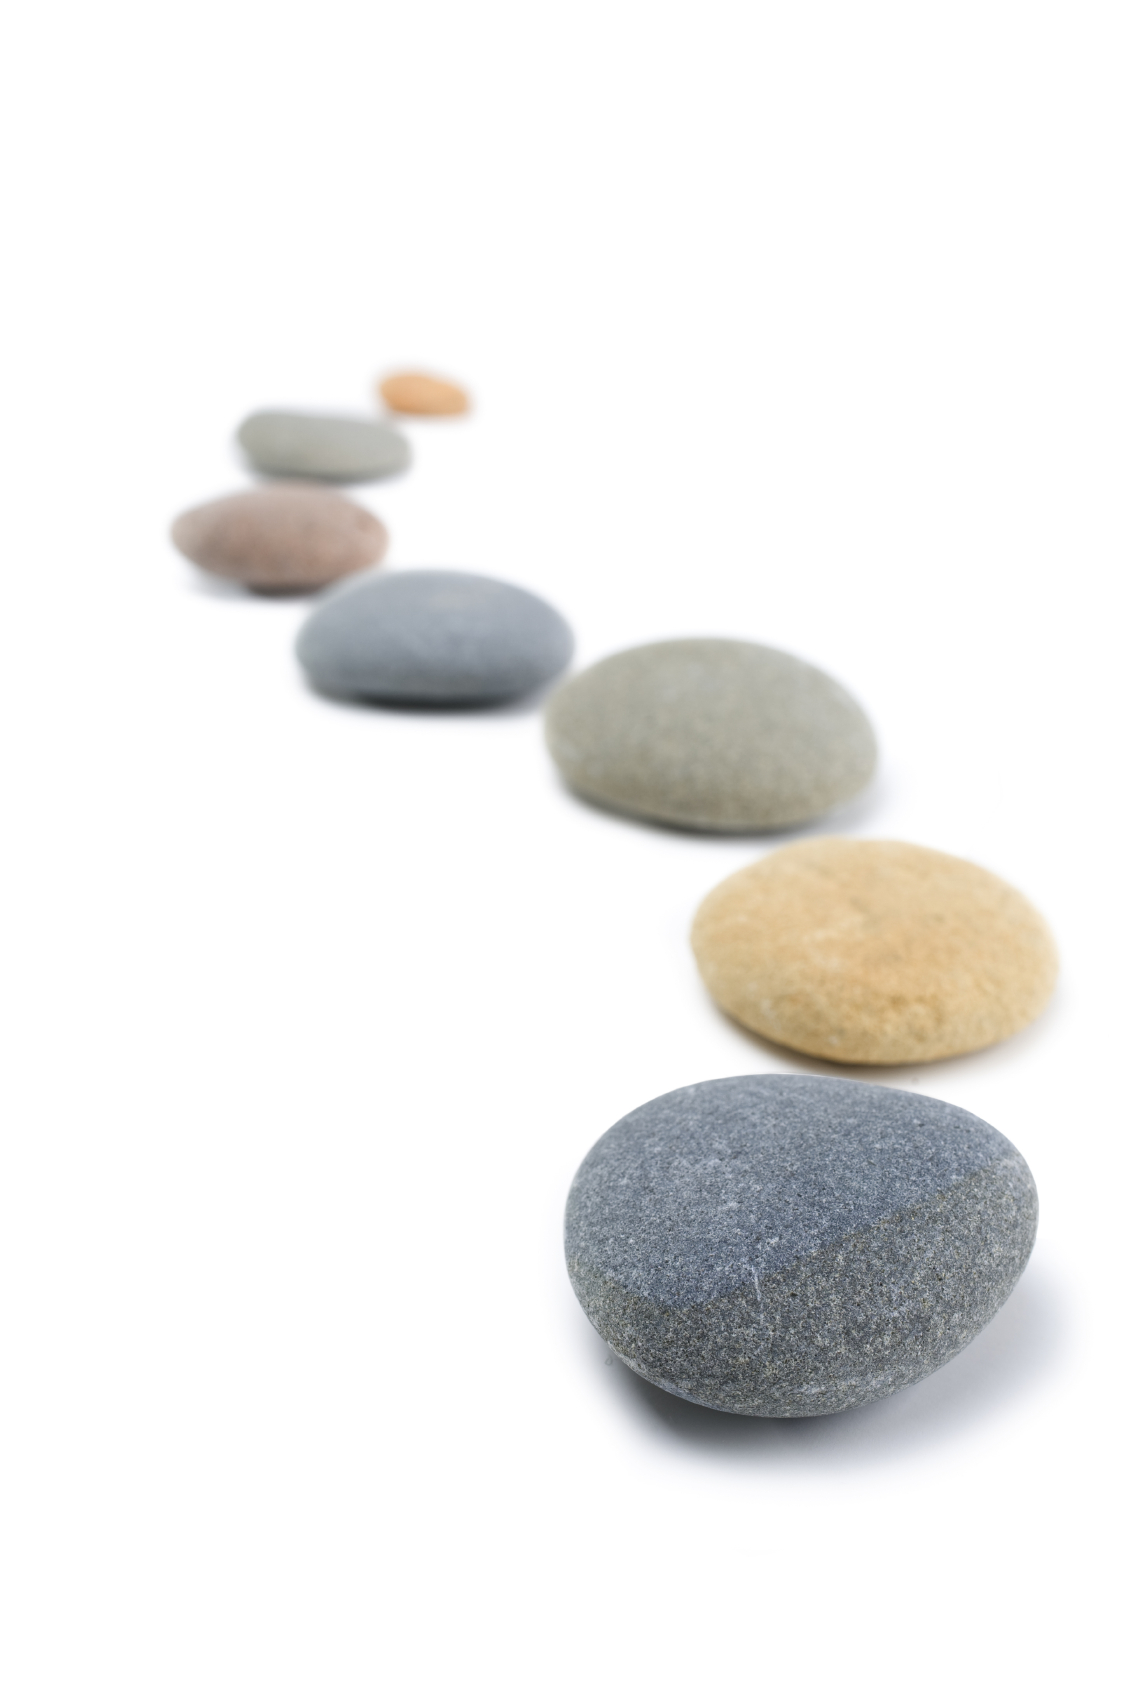 Rounded stones arranged in a curving line on white background. More stones:-[url=http://www.istockphoto.com/file_search.php?action=file&lightboxID=4053403]here[/url]